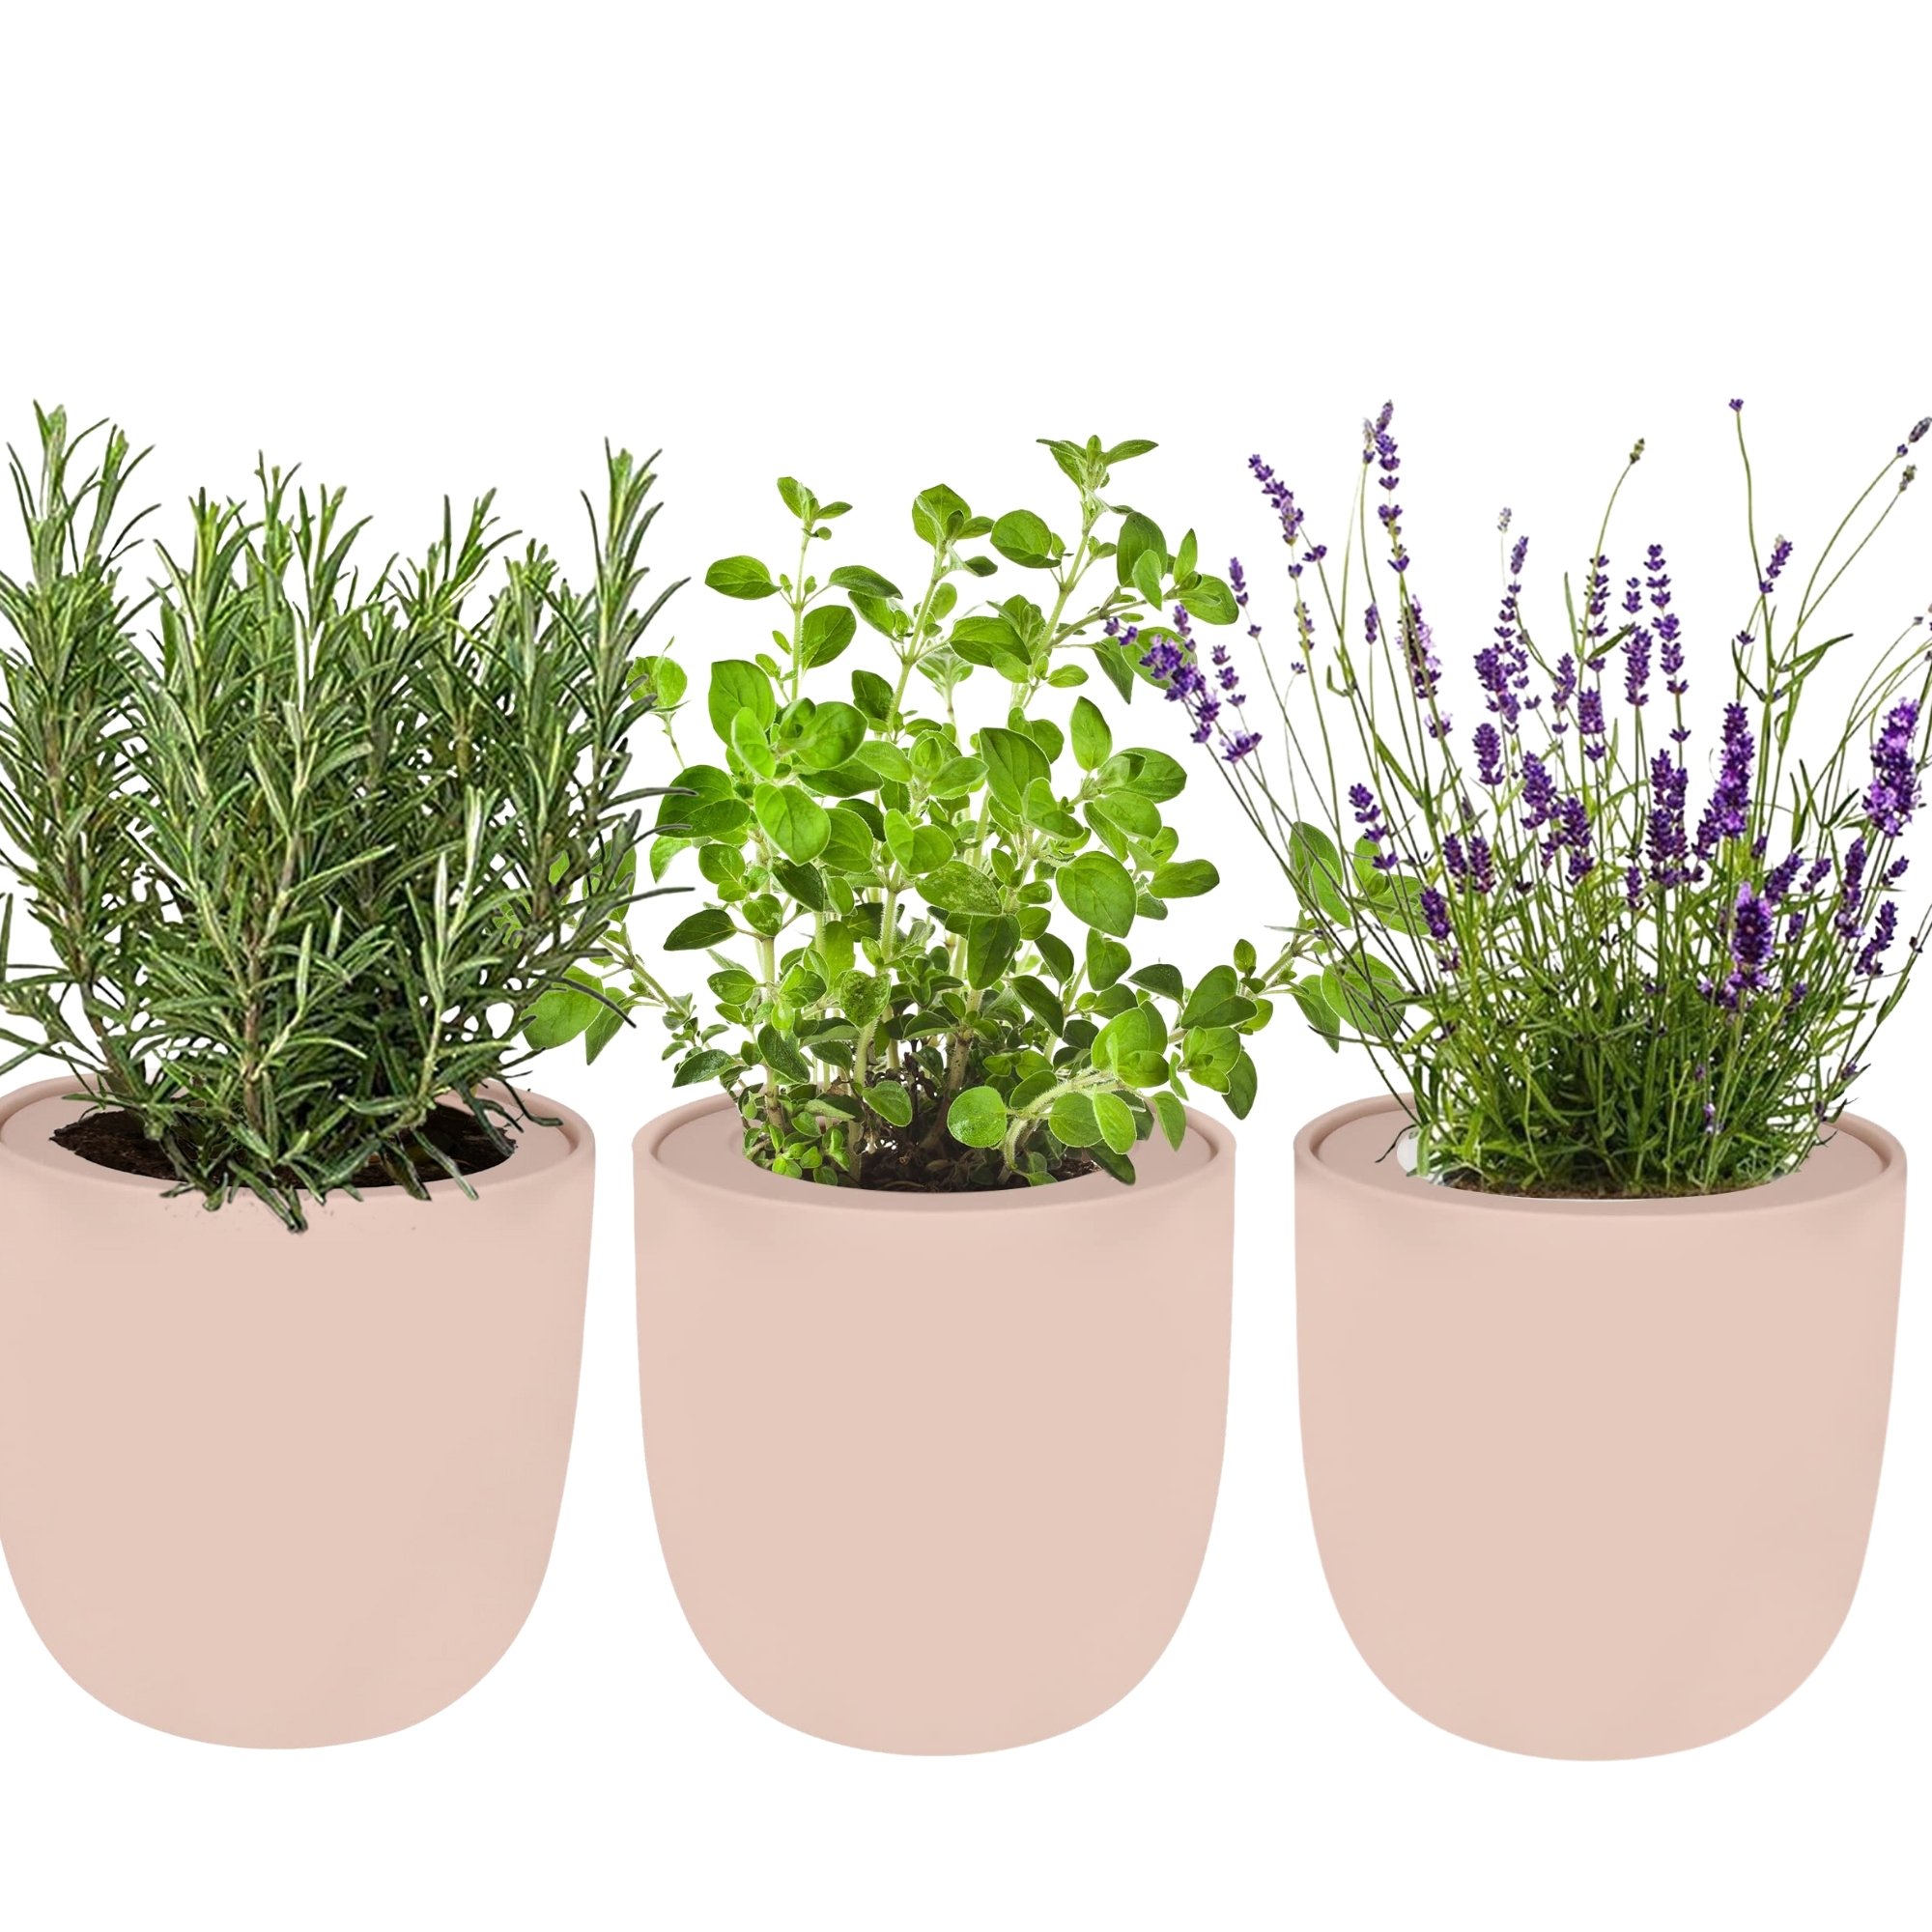 Hydroponic Herb Growing Trio Sets with Pink Ceramic Pot and Seeds (Rosemary, Lavender, Oregano)